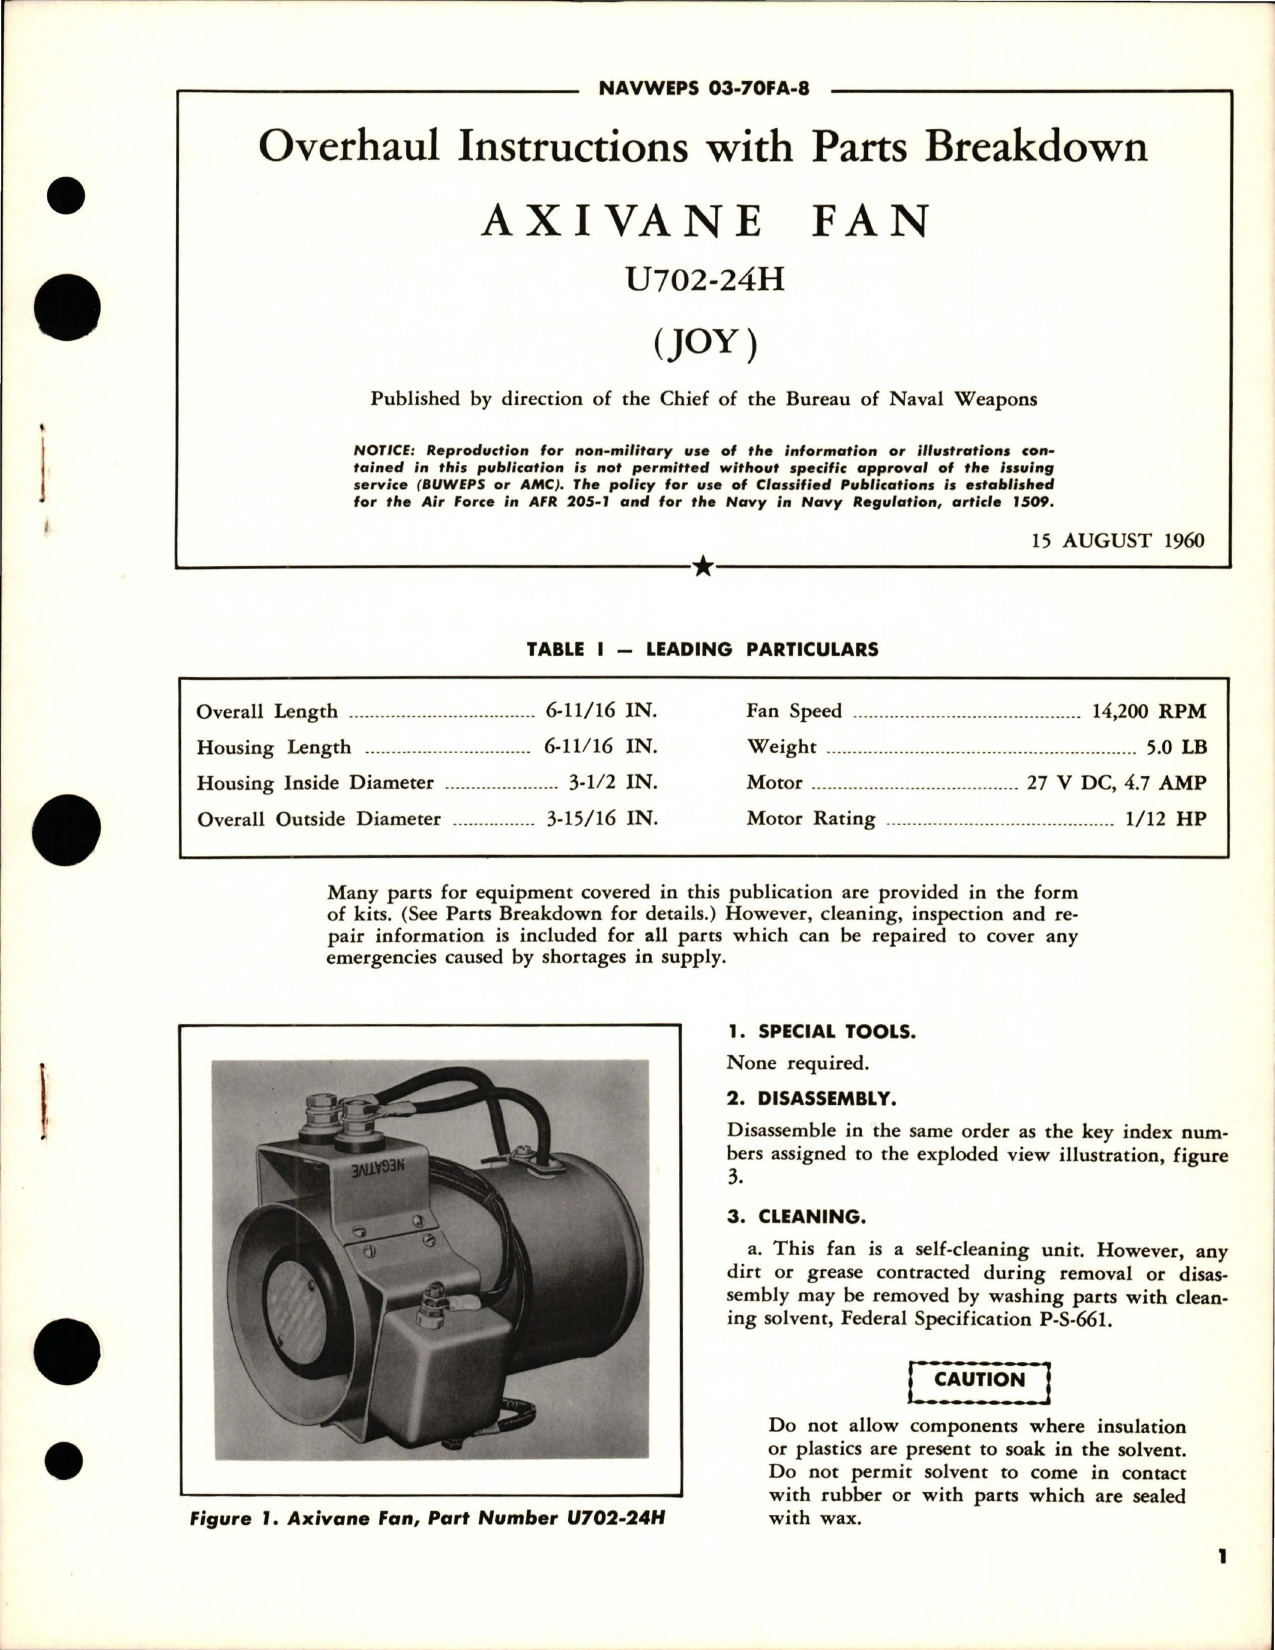 Sample page 1 from AirCorps Library document: Overhaul Instructions with Parts Breakdown for Axivane Fan - U702-24H 